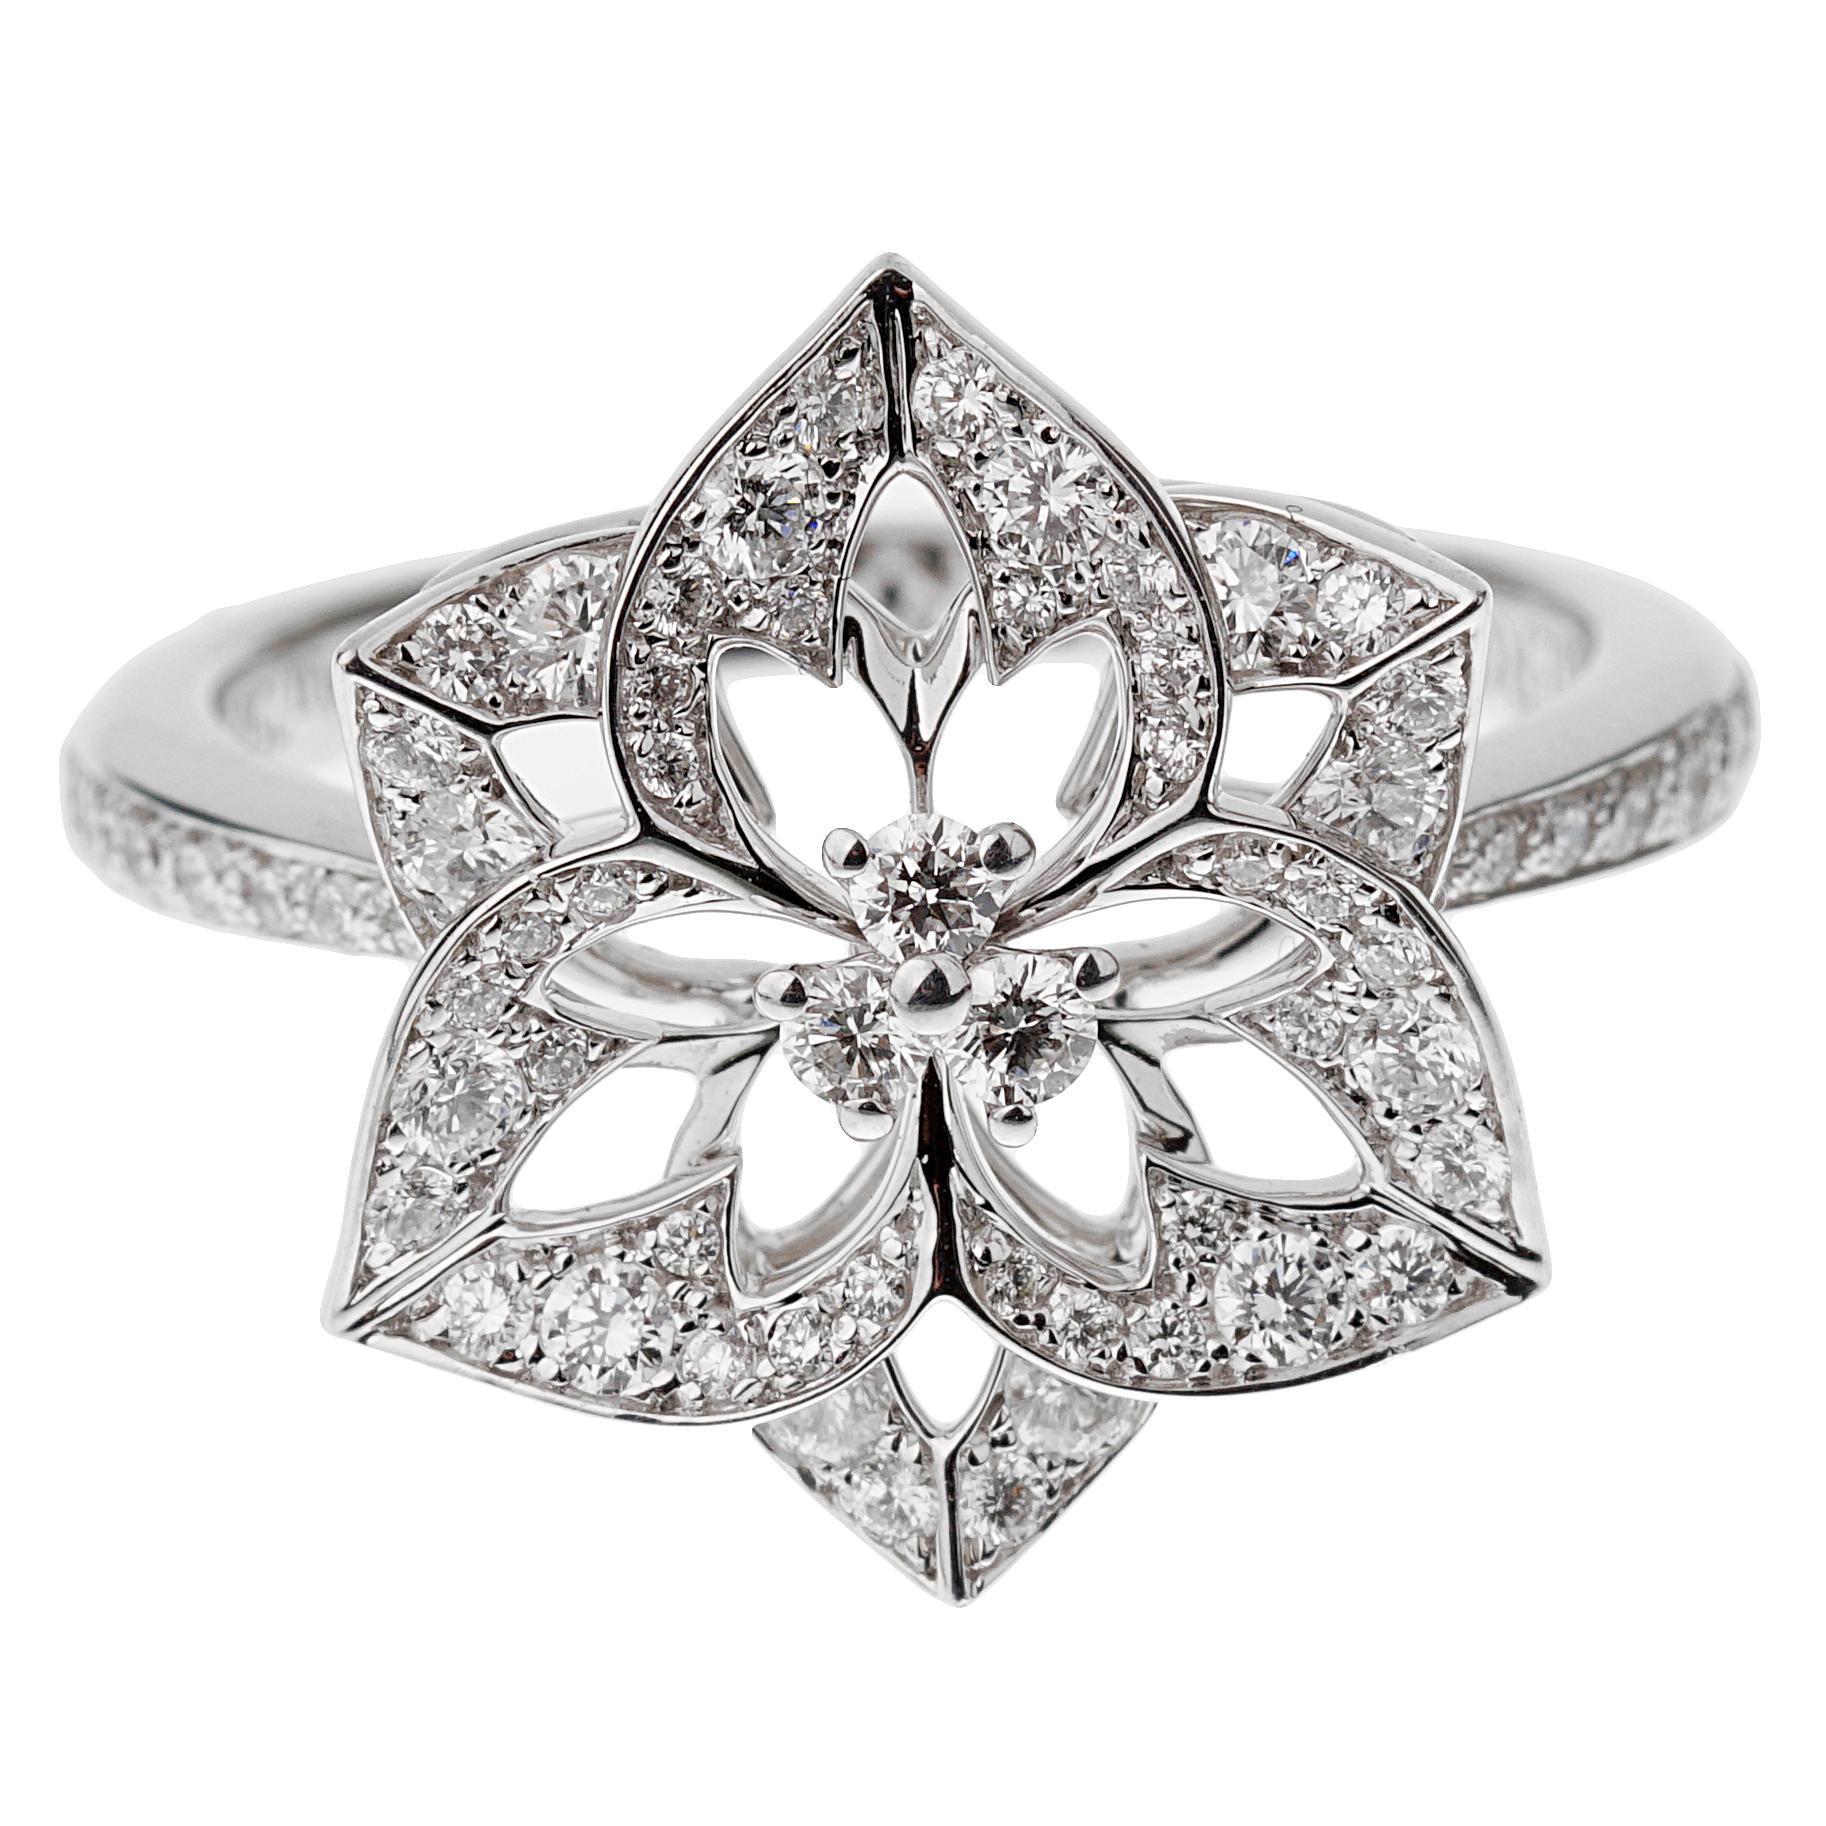 A chic Boucheron diamond ring showcasing a flower motif in shimmering 18k white gold, the ring is set with .57ct of the finest round brilliant cut vs diamonds. Size 6 1/4 and can be resized.